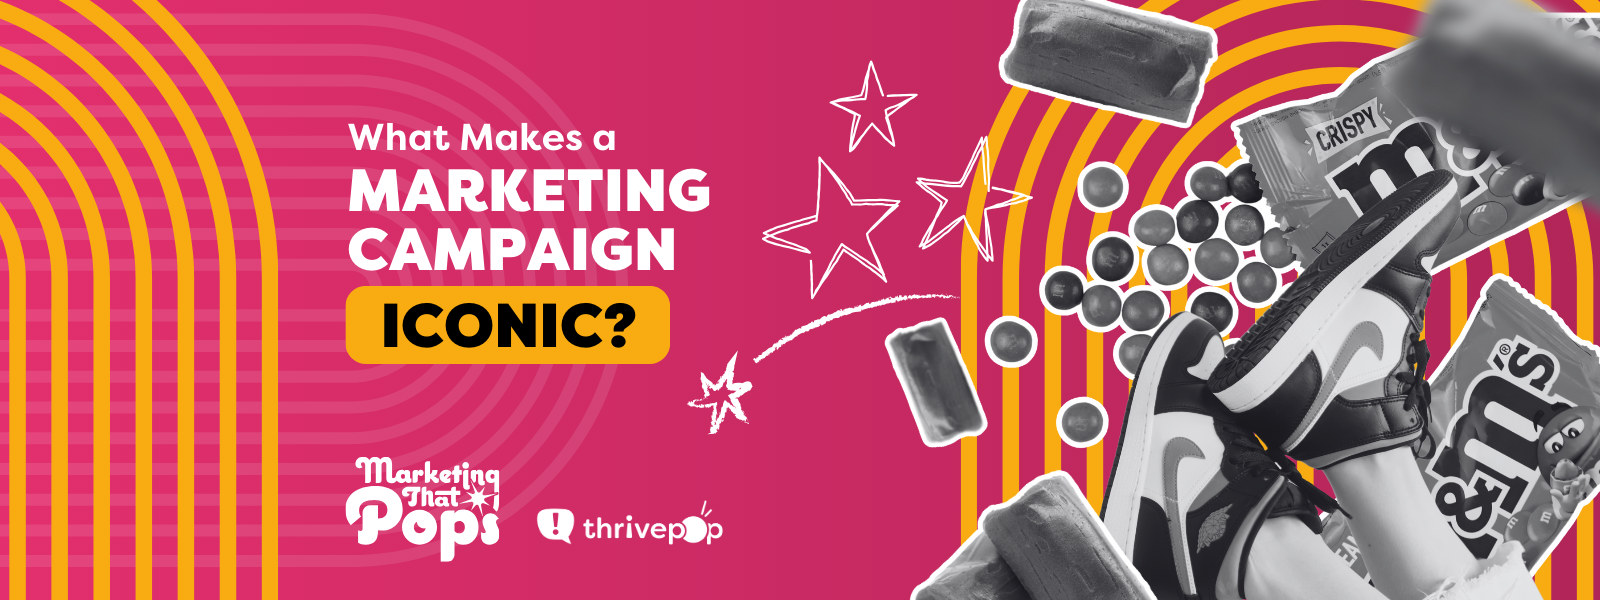 What Makes A Marketing Campaign Iconic?